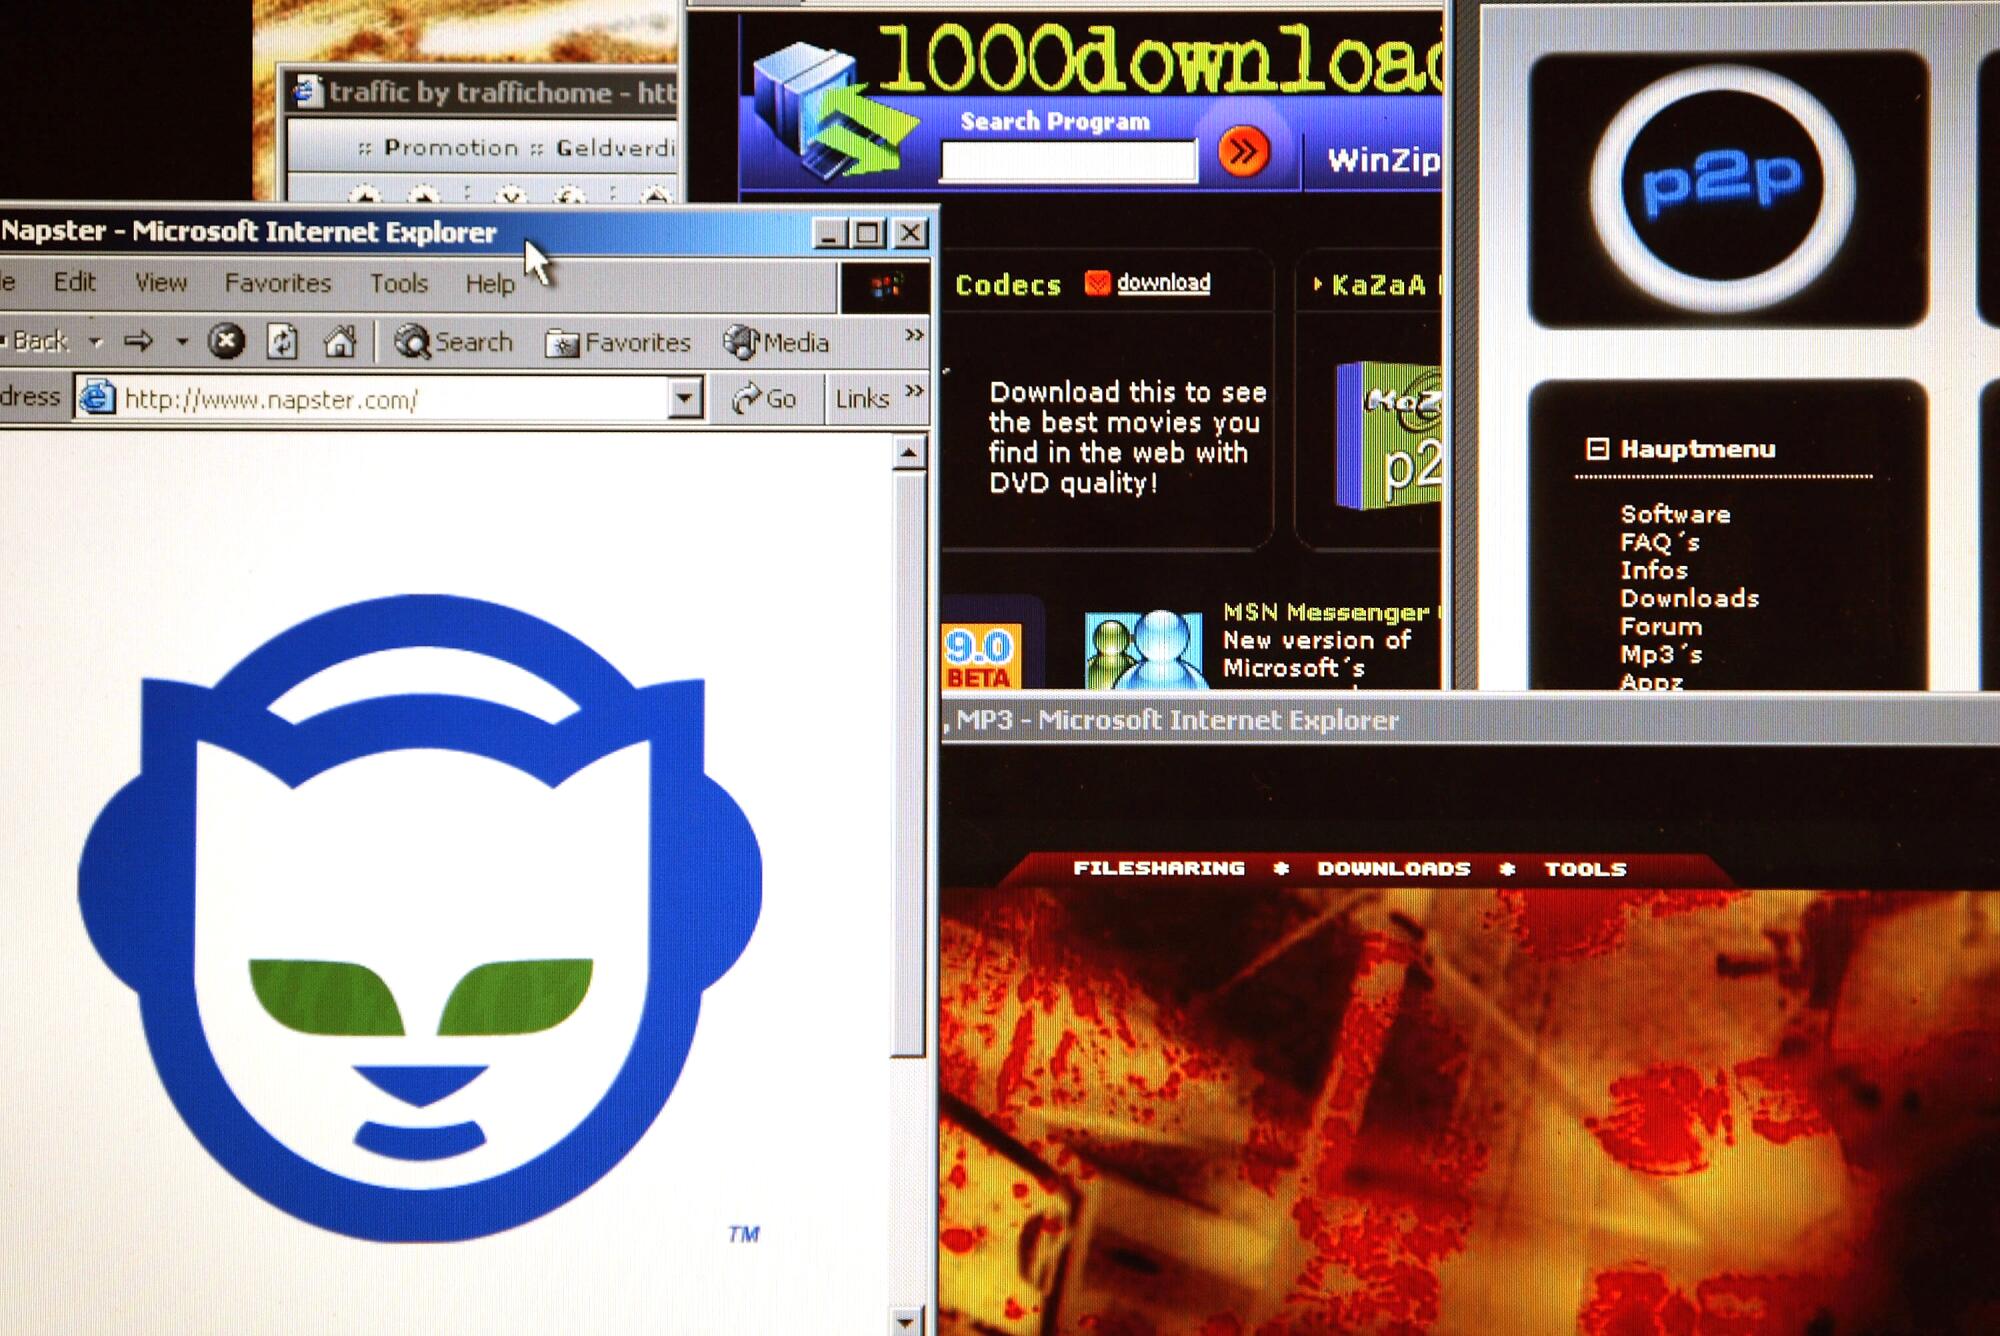 The Napster internet site appears on a computer screen.